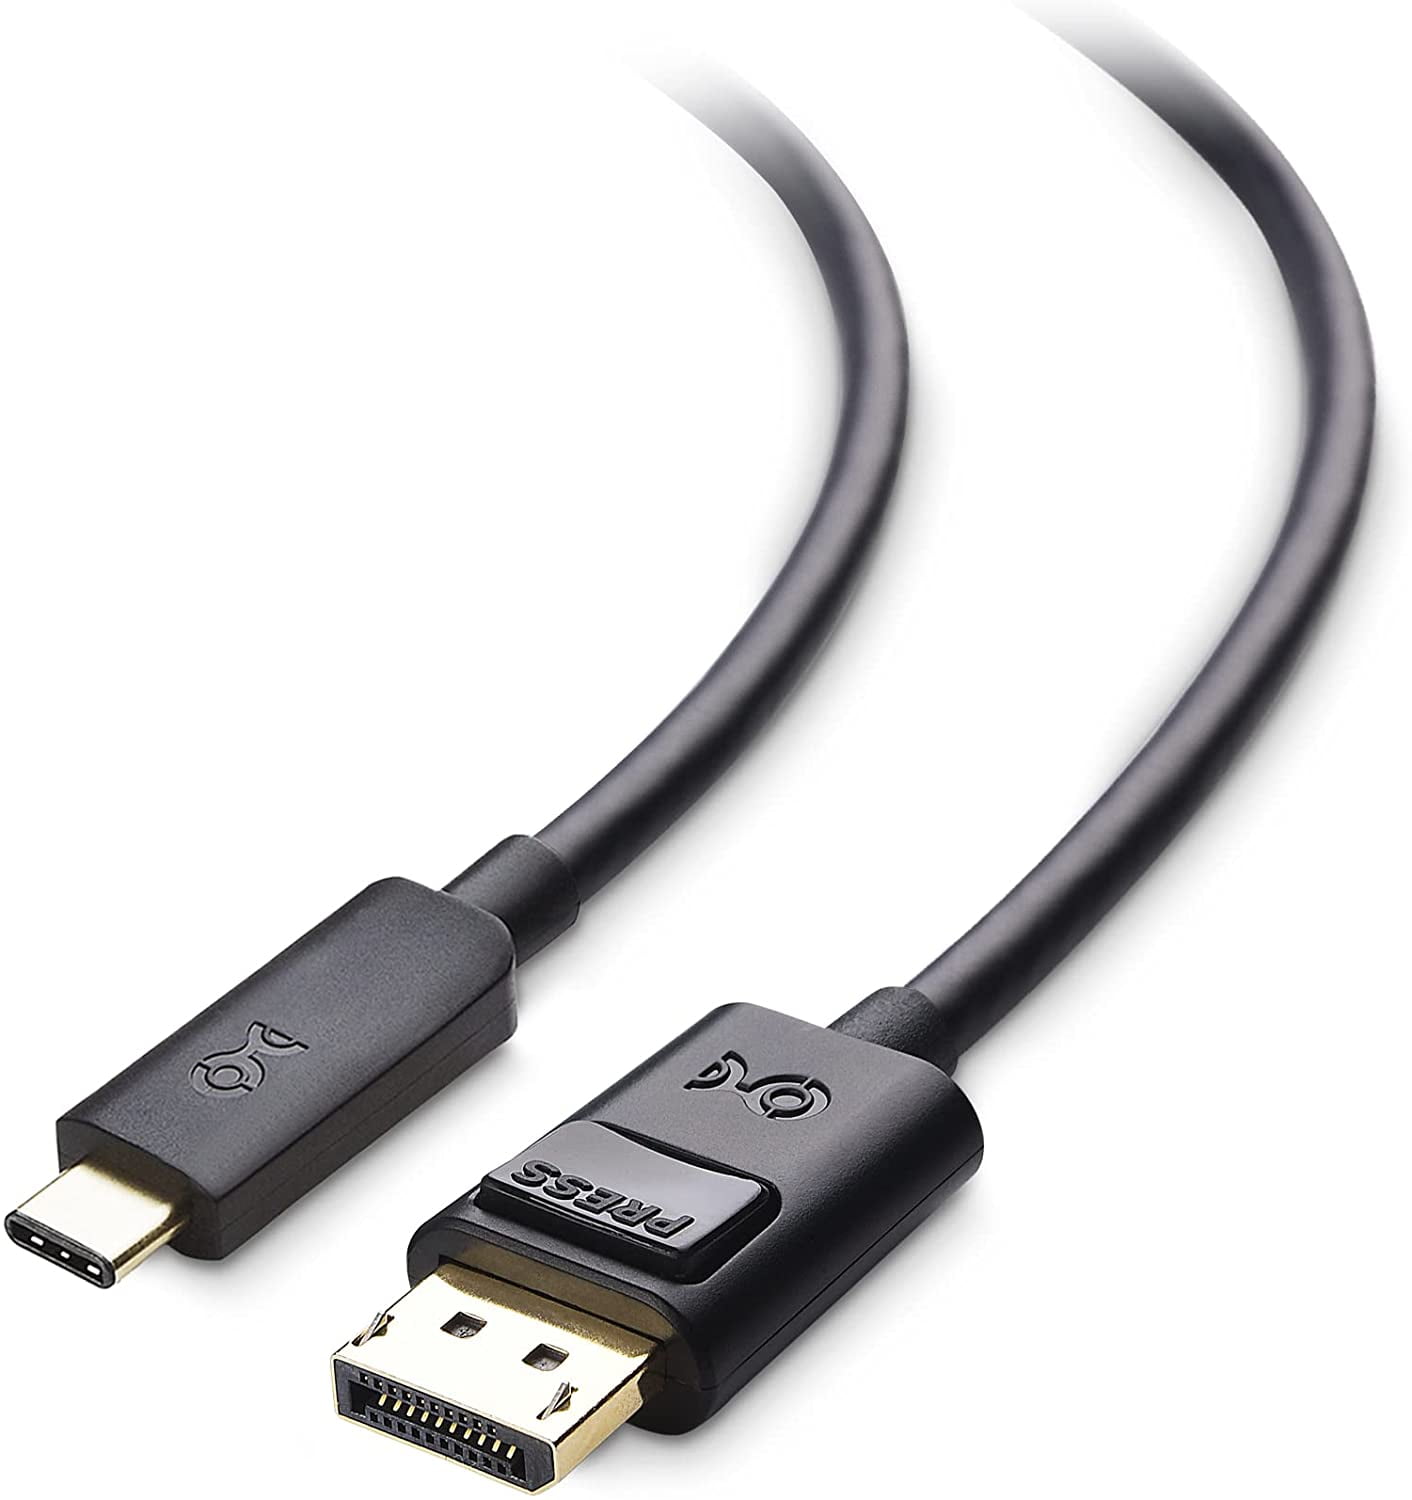 Cable Matters USB C to DisplayPort Cable (USB-C to DisplayPort Cable/USB C  to DP Cable) Supporting 4K 60Hz Black 6 Feet - Thunderbolt 3 Port  Compatible for MacBook Pro, Dell XPS 13/15